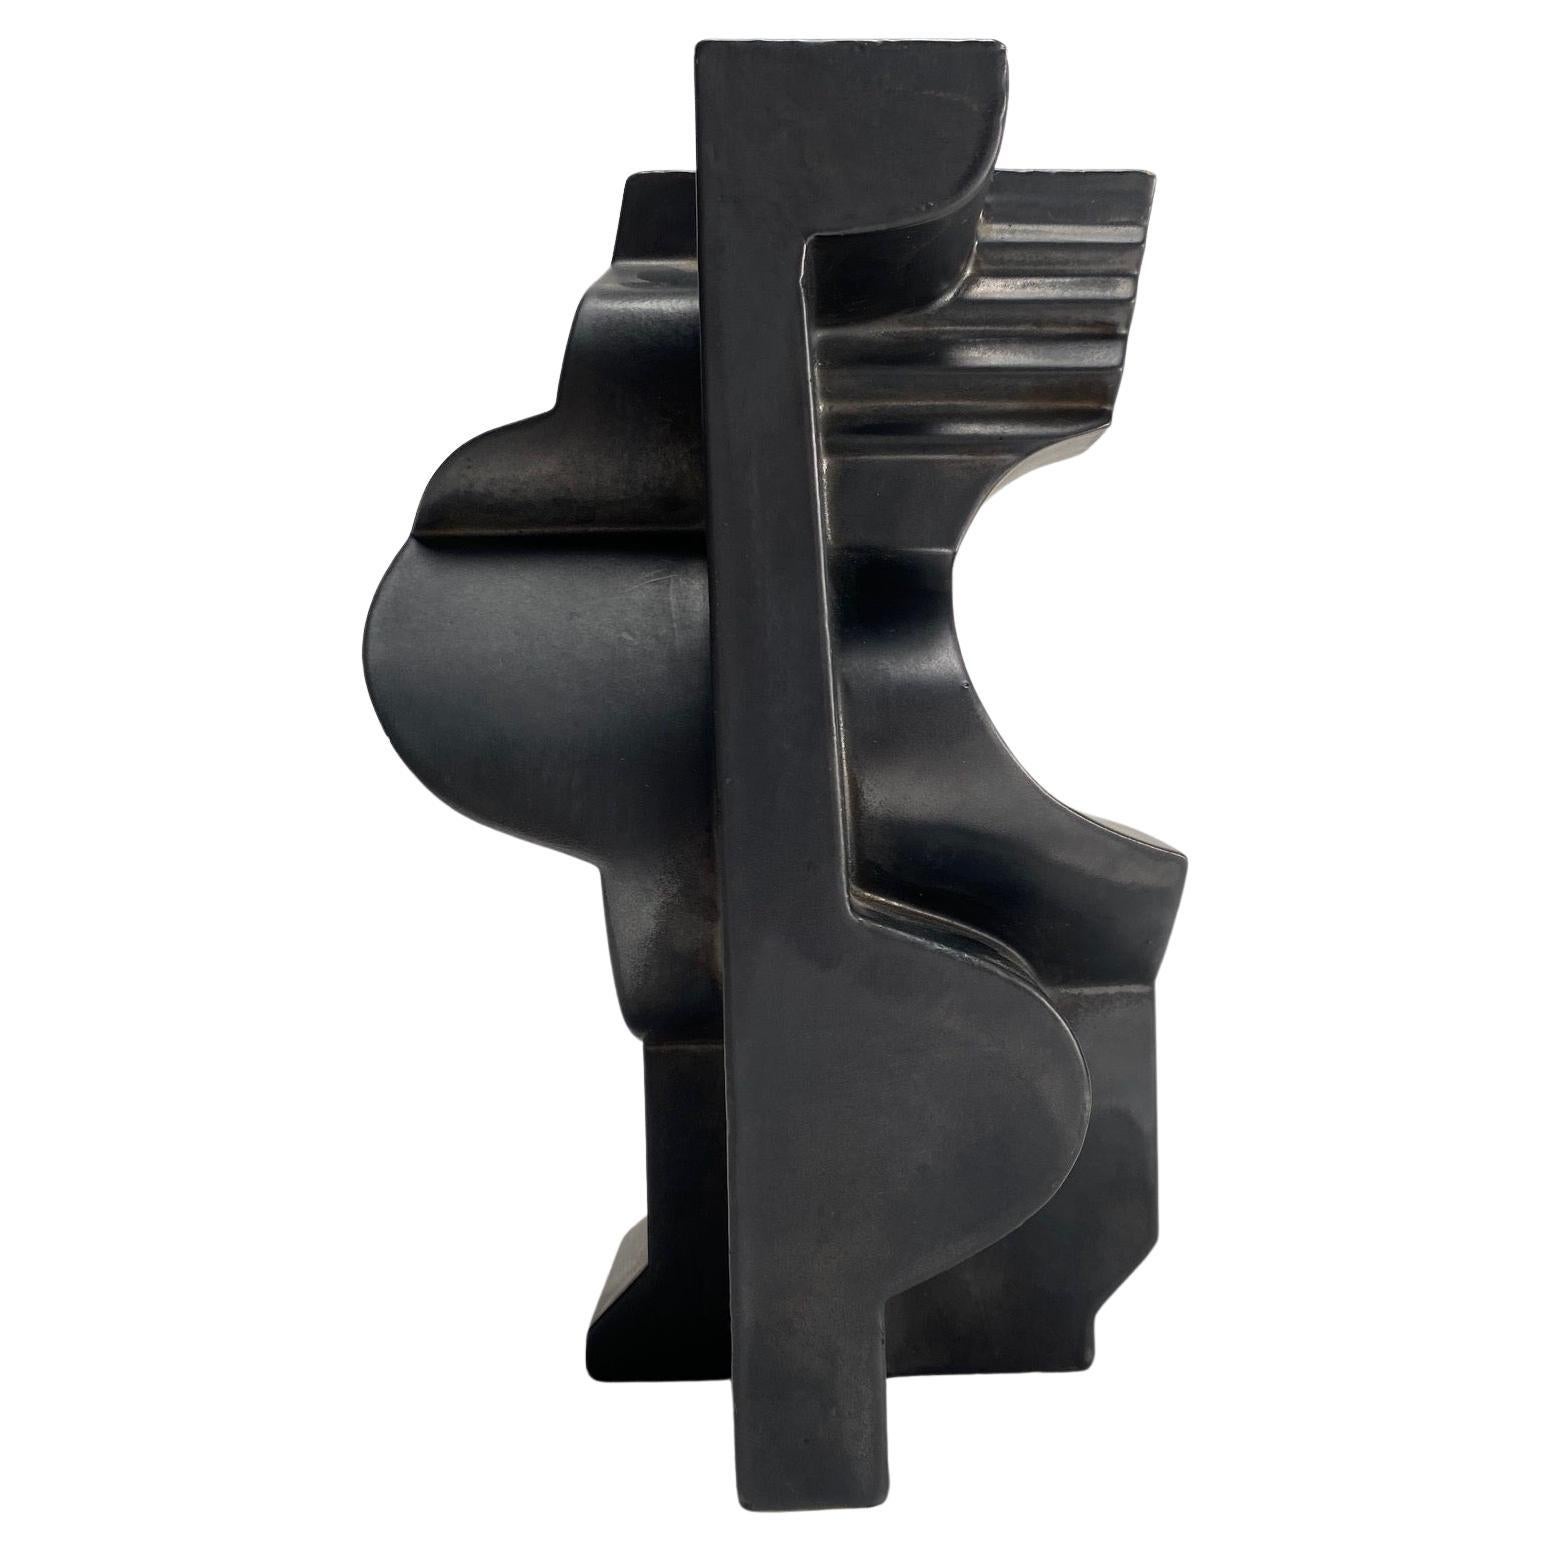 Nino Caruso ( Tripoli 1928 - Rome 2017 )
Abstract Sculpture in Black Glazed Ceramic. 1974, Signed and dated under the base.

Italian ceramist, sculptor and designer, Nino Caruso was one of the protagonists of Italian artistic and creative life in